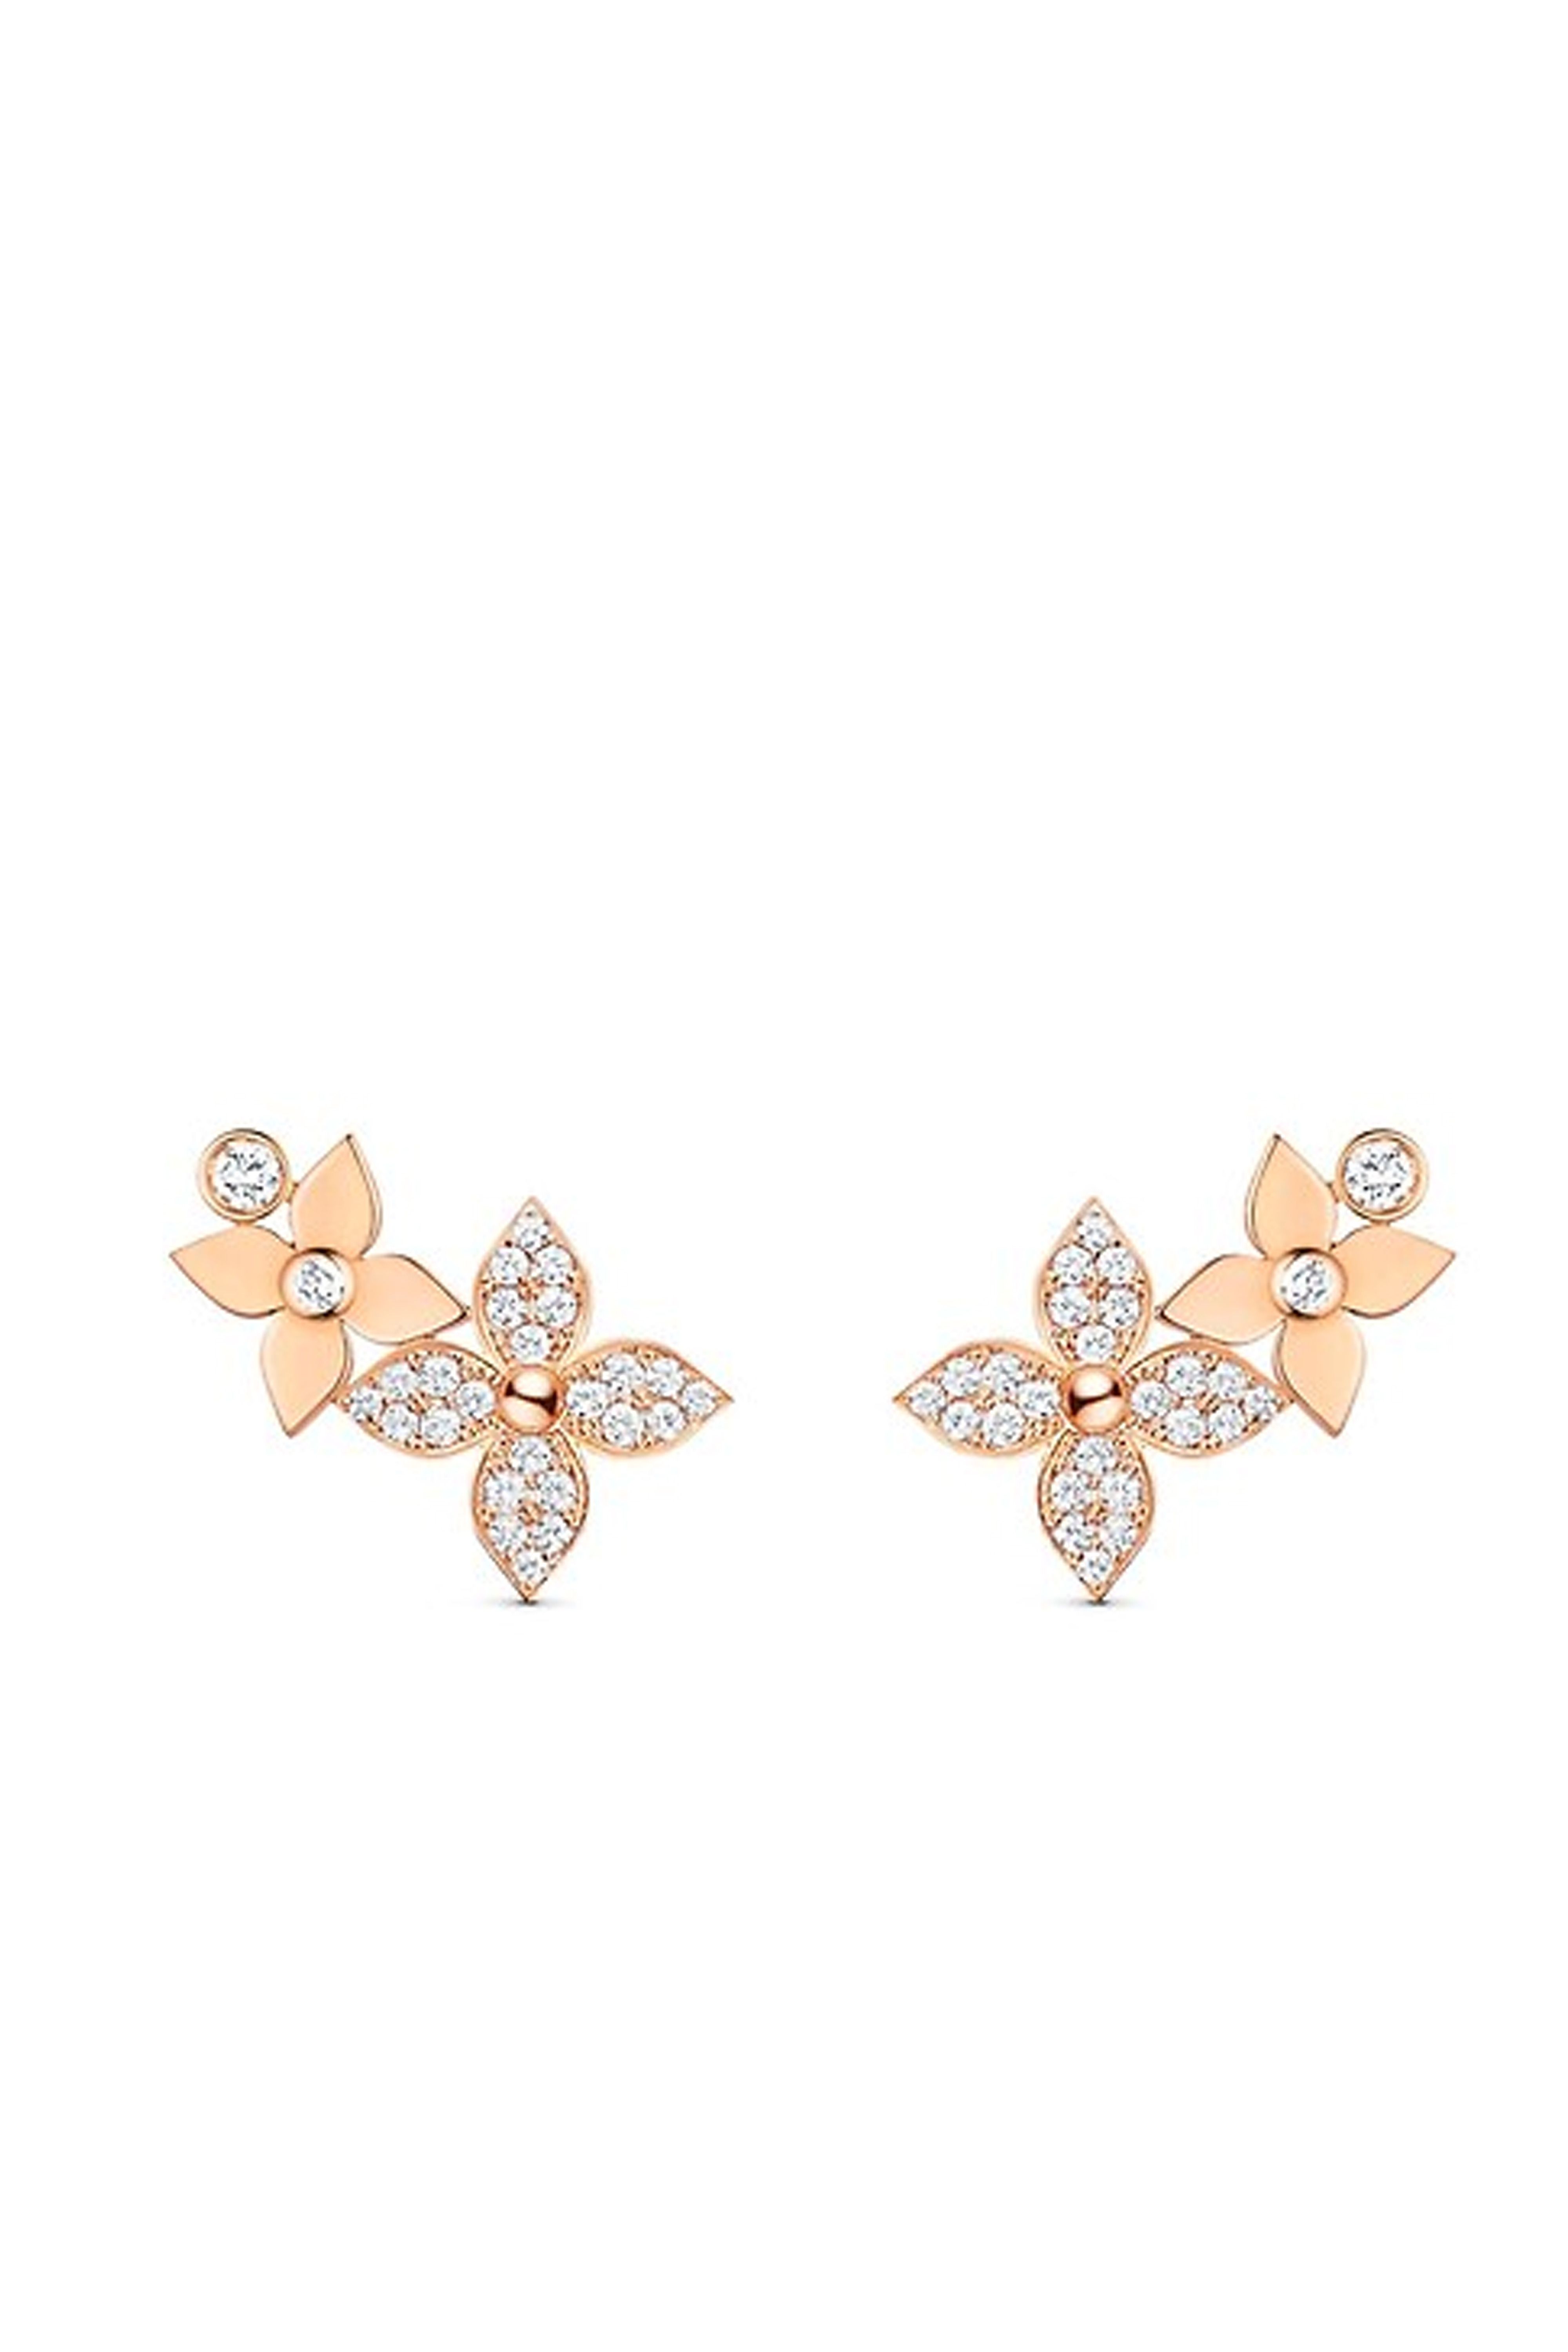 Star blossom pink gold earrings Louis Vuitton Gold in Pink gold